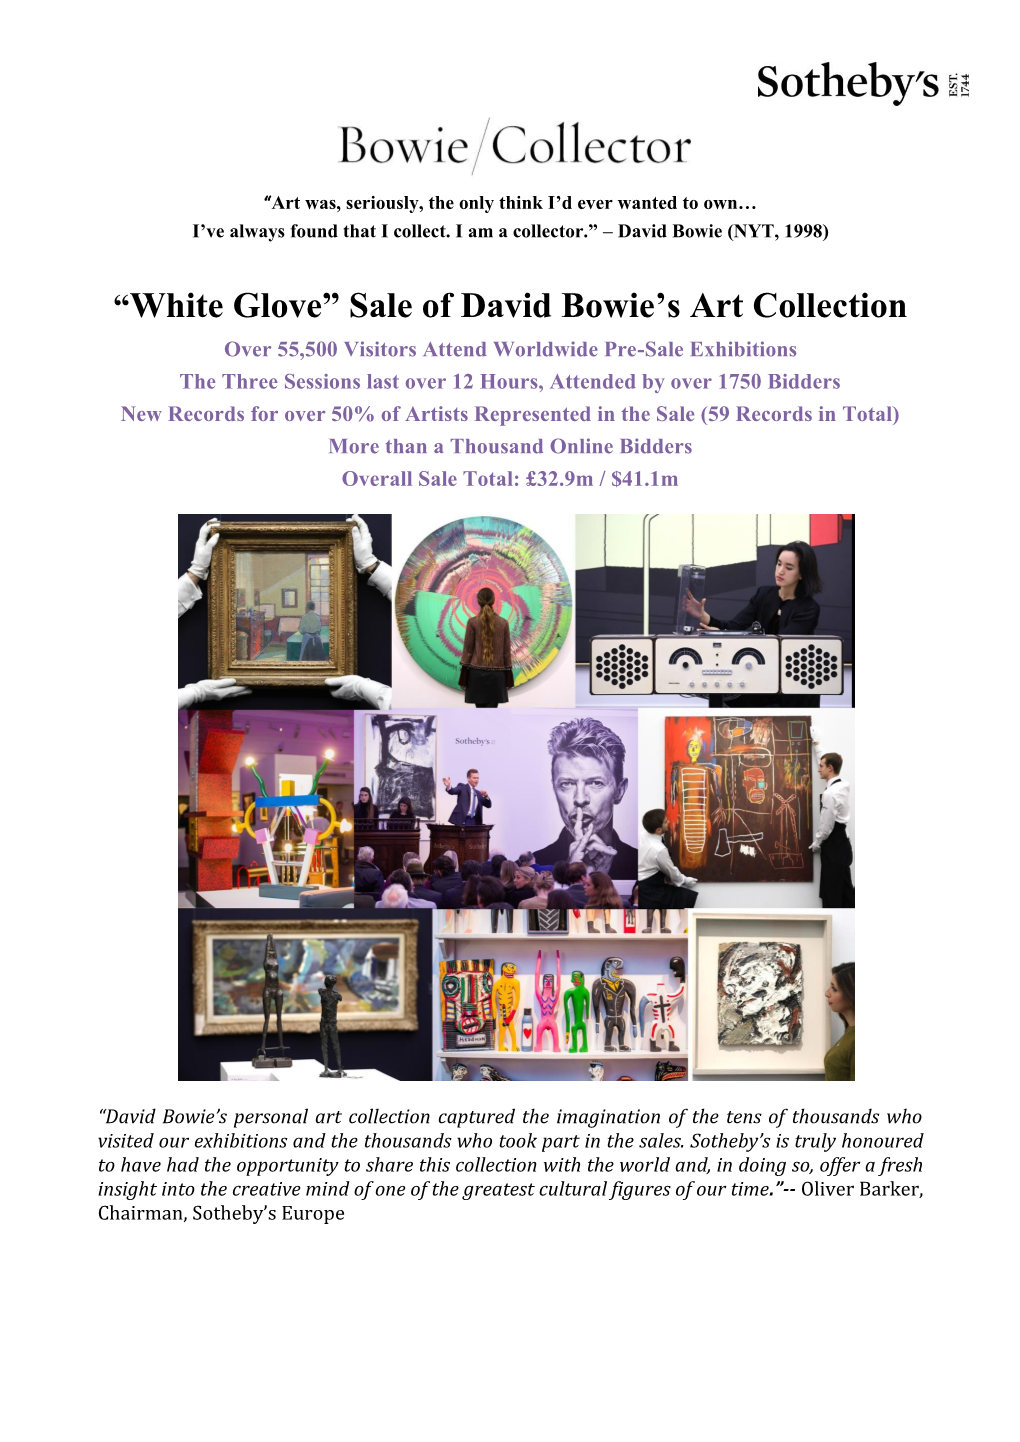 “White Glove” Sale of David Bowie's Art Collection